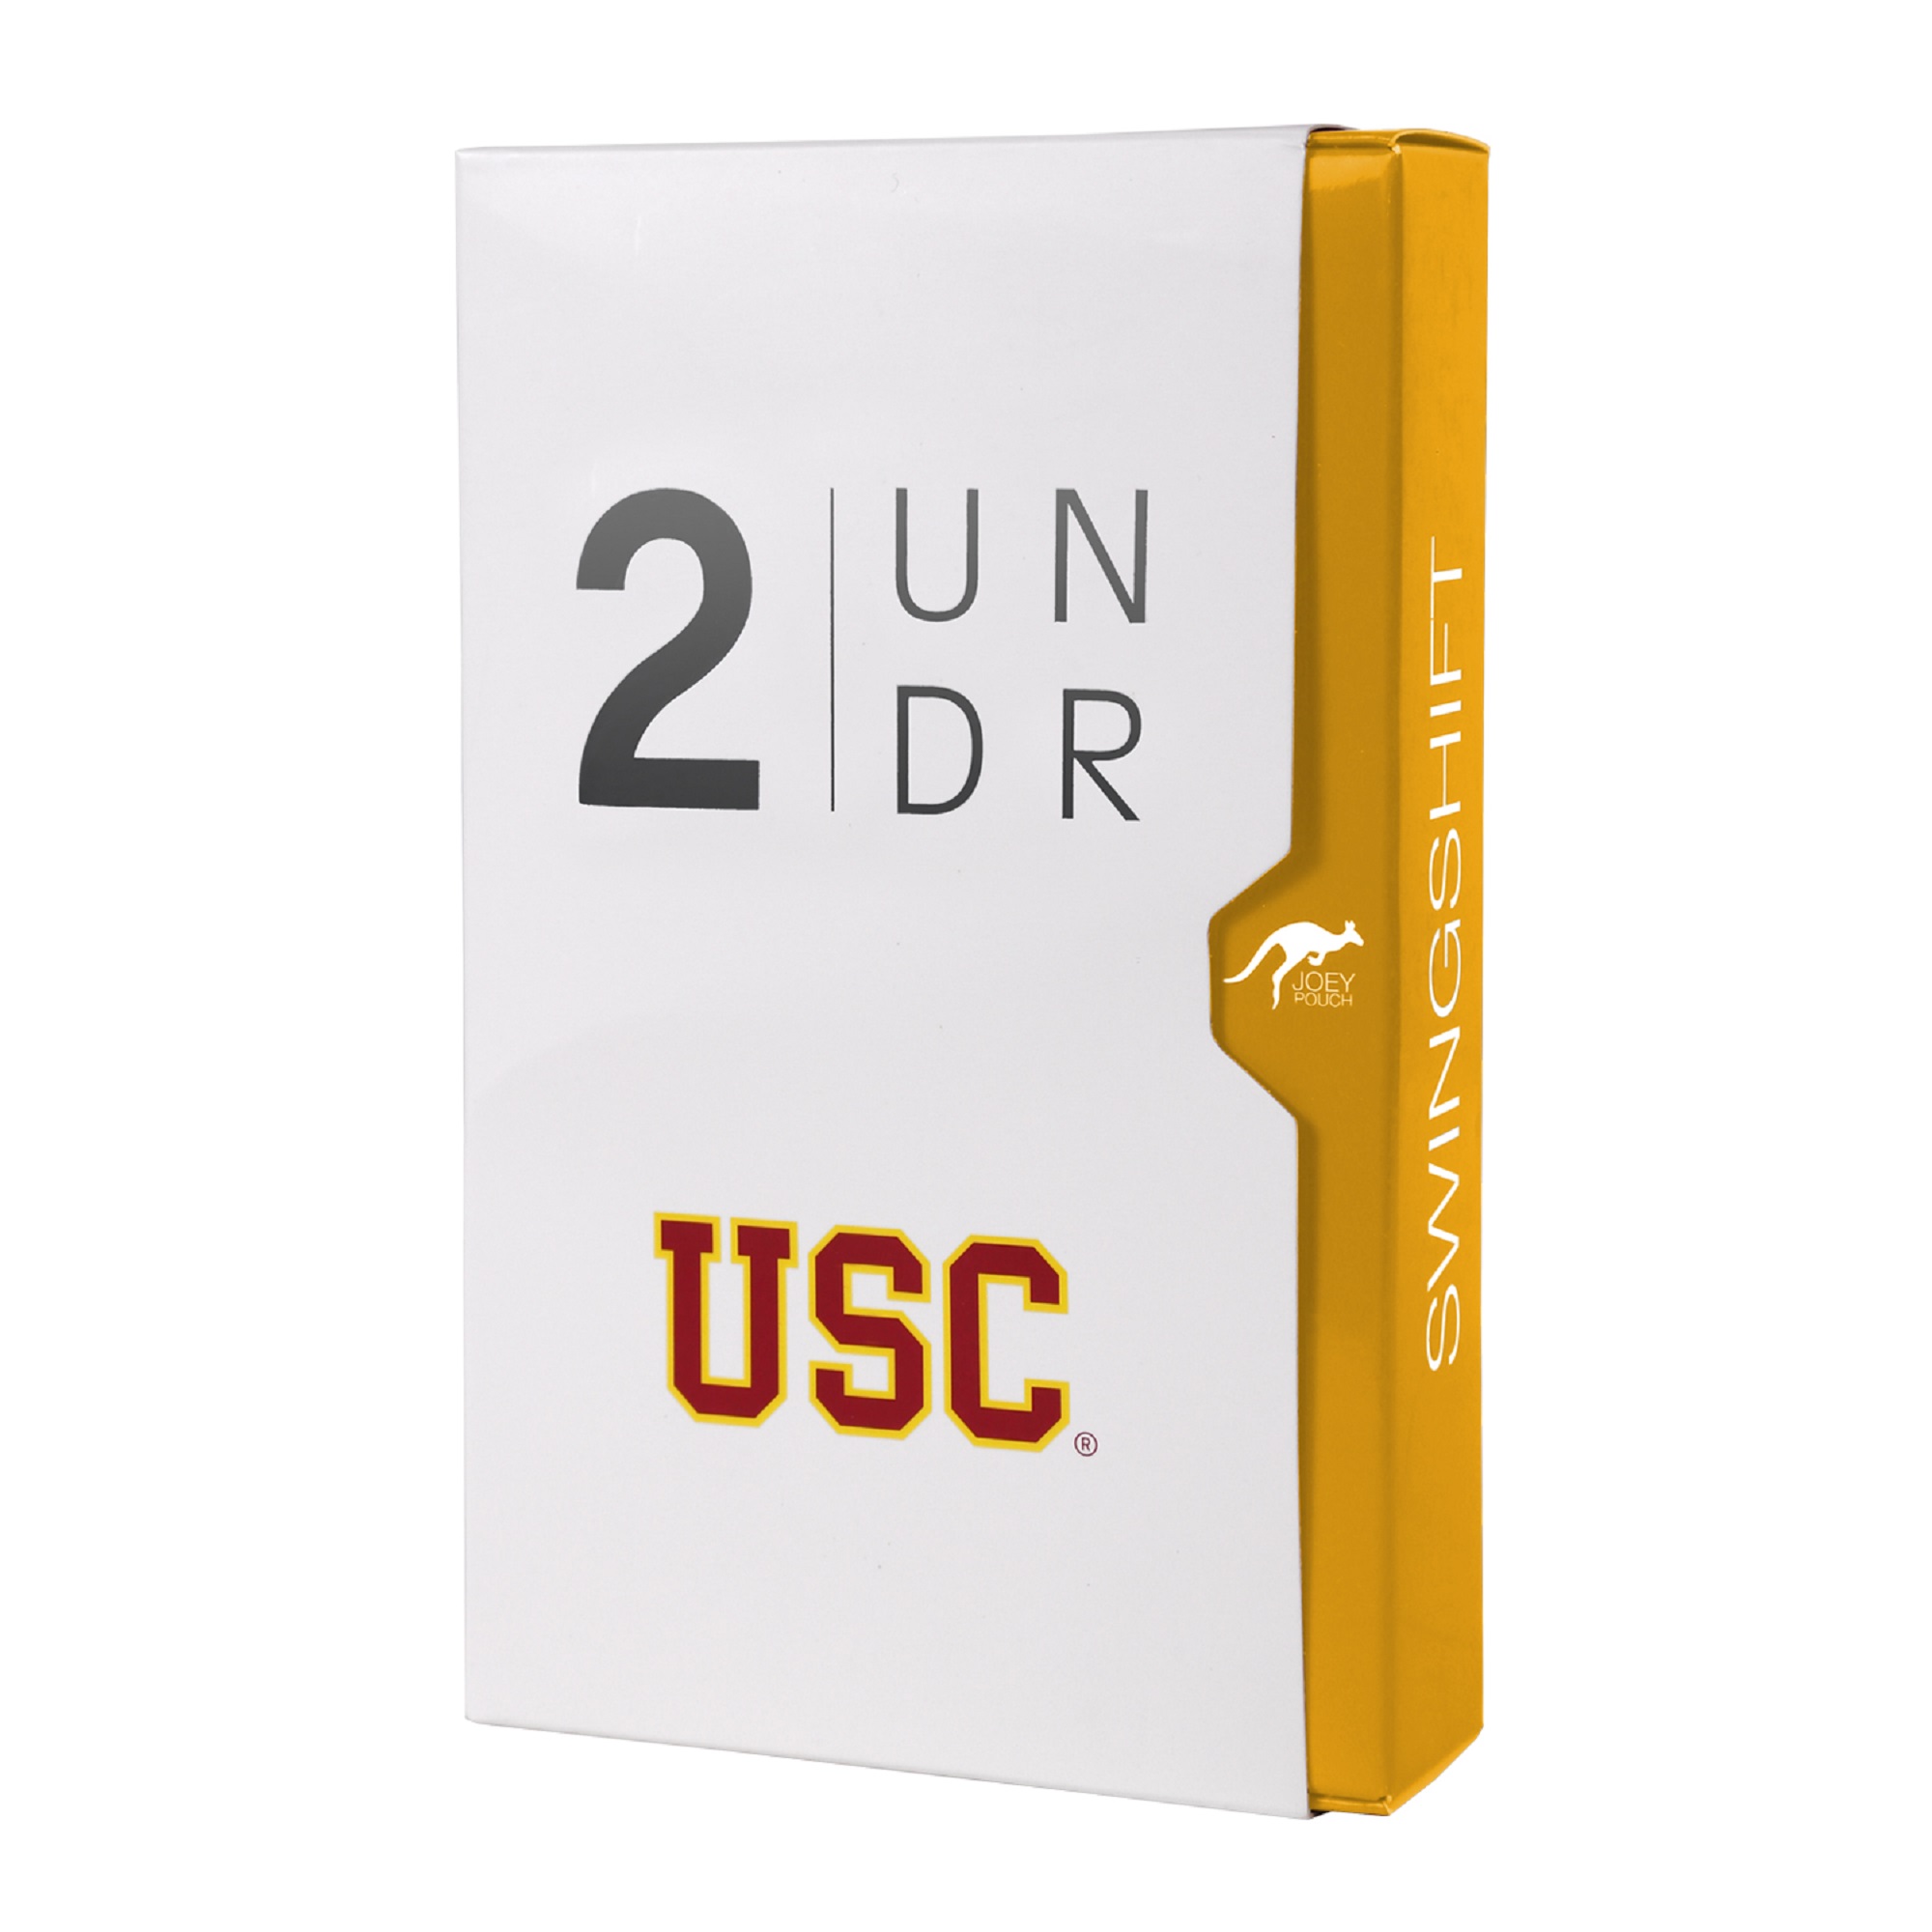 2UNDR NCAA Team Colors Men's Swing Shift Boxers (Usc Athletic Gold, Small) - image 2 of 5